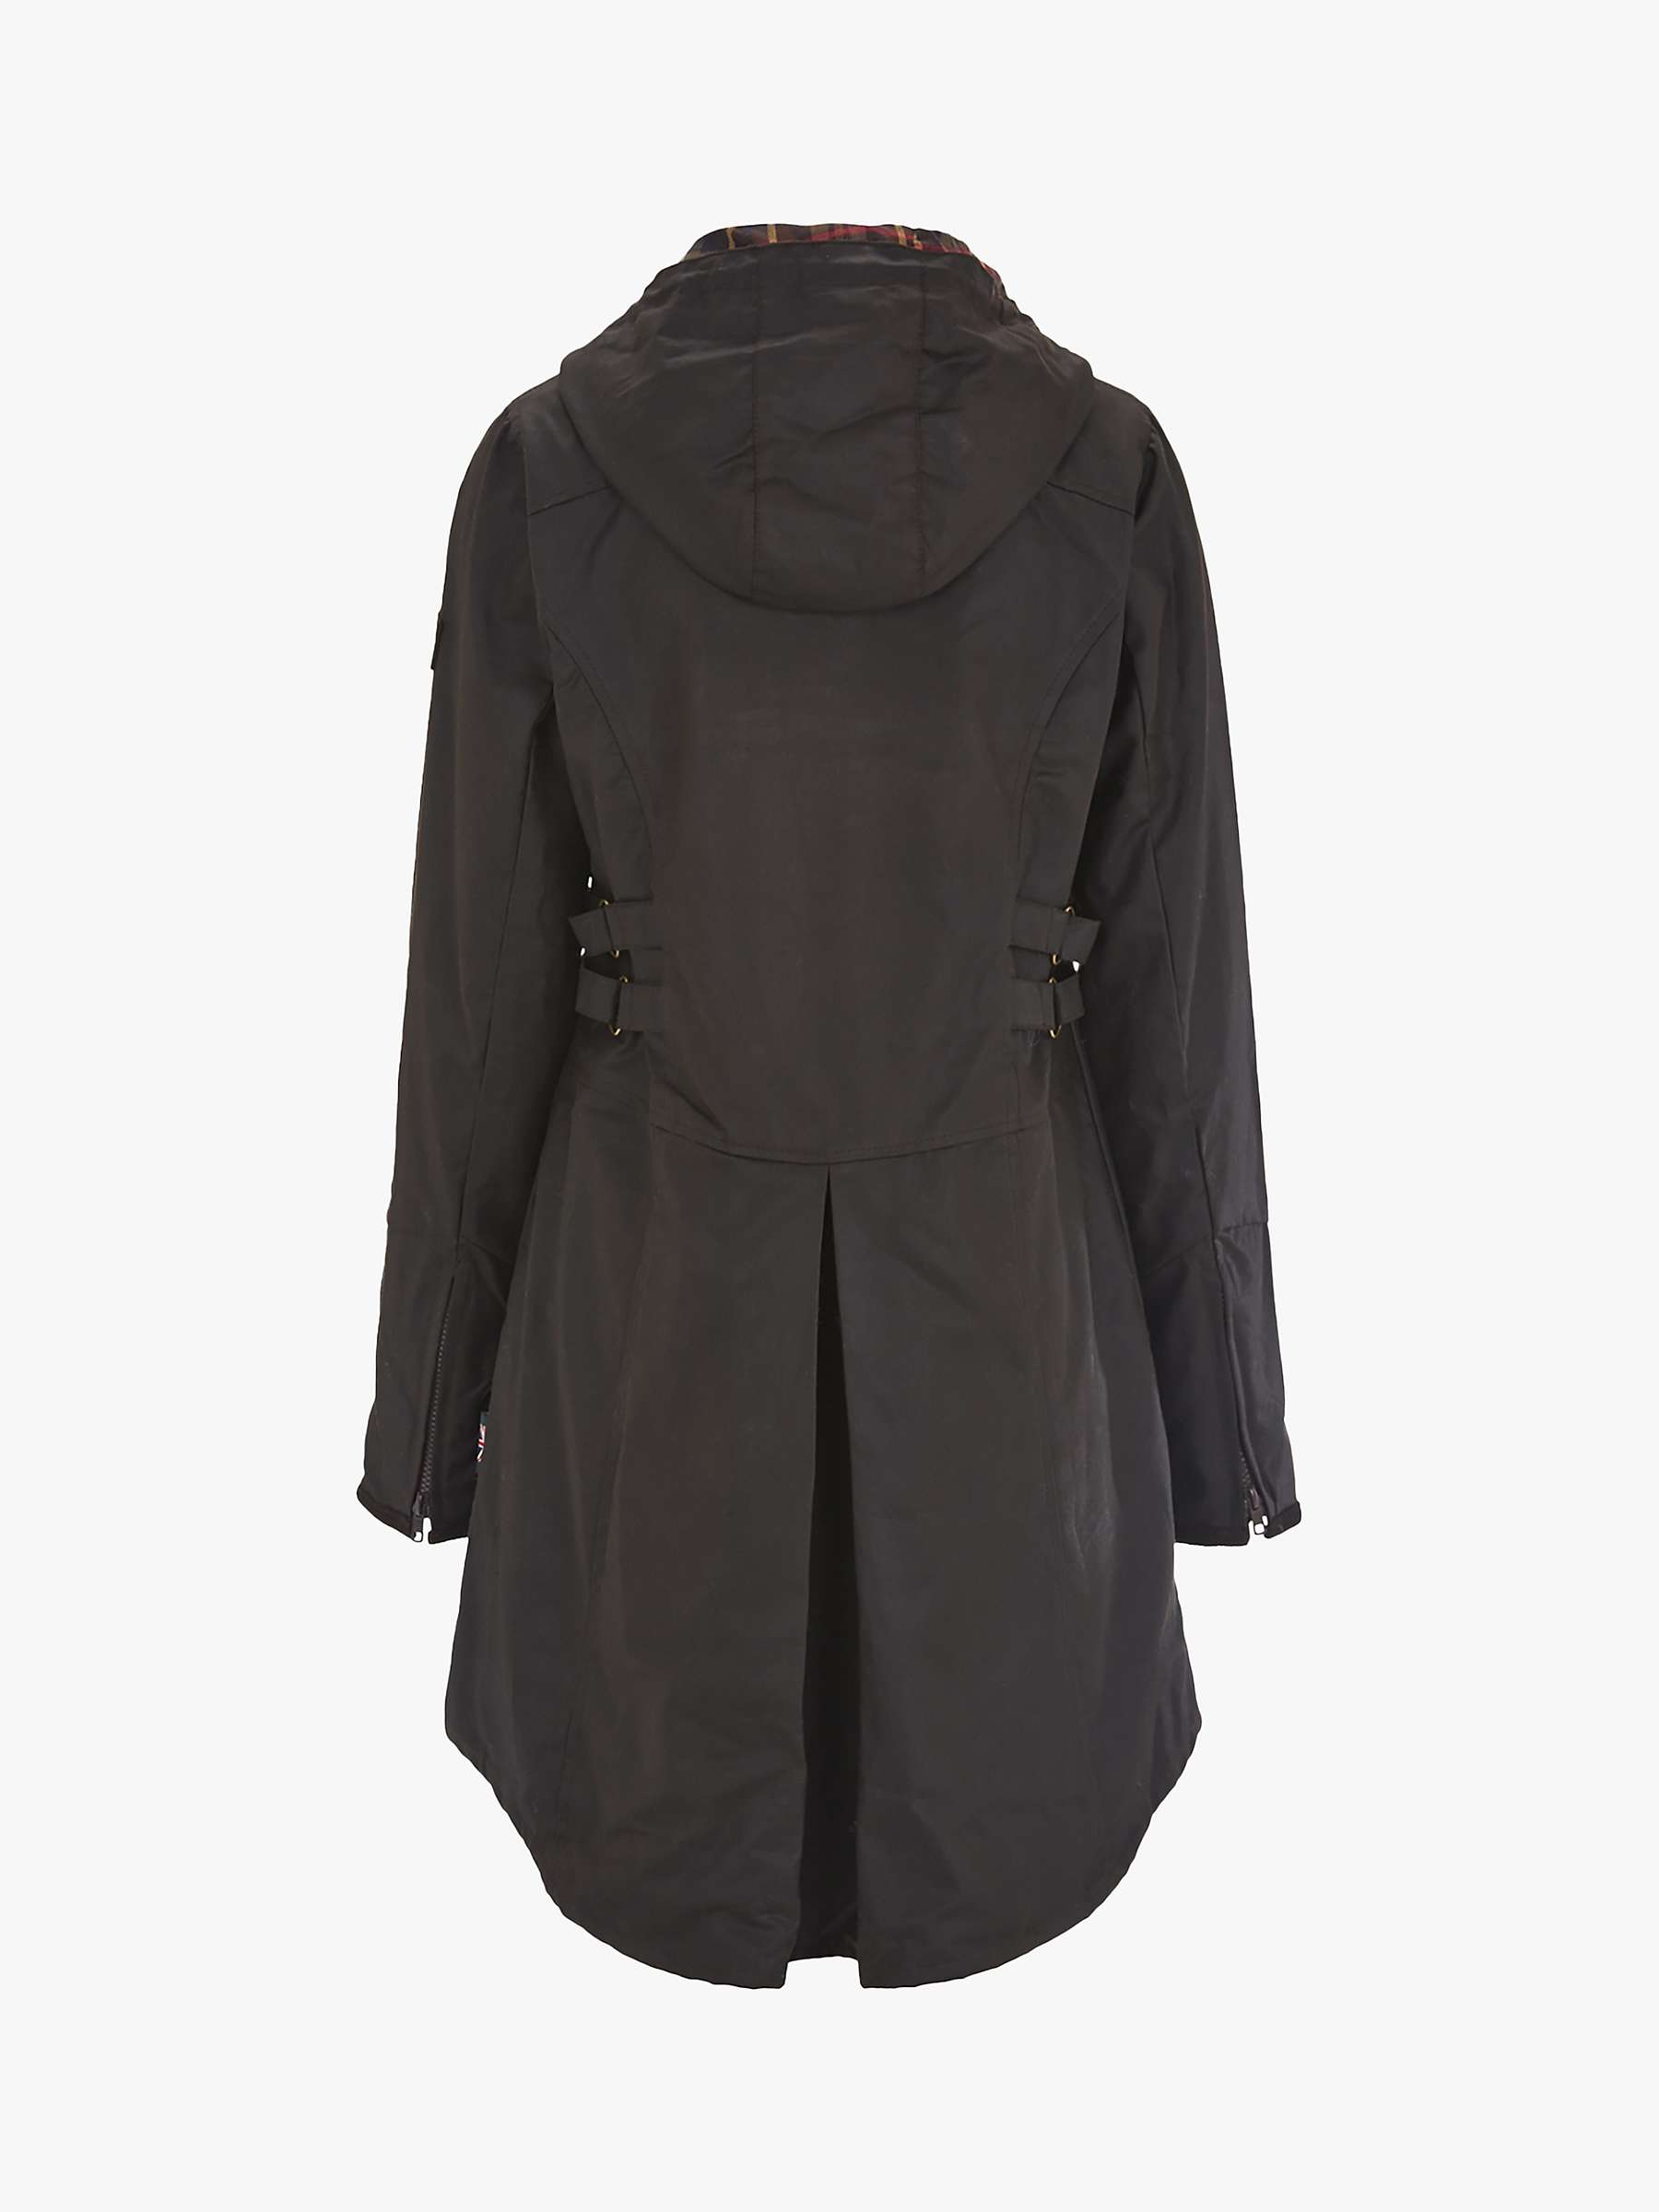 Buy Celtic & Co. Waxed Cotton Riding Coat, Dark Brown Online at johnlewis.com